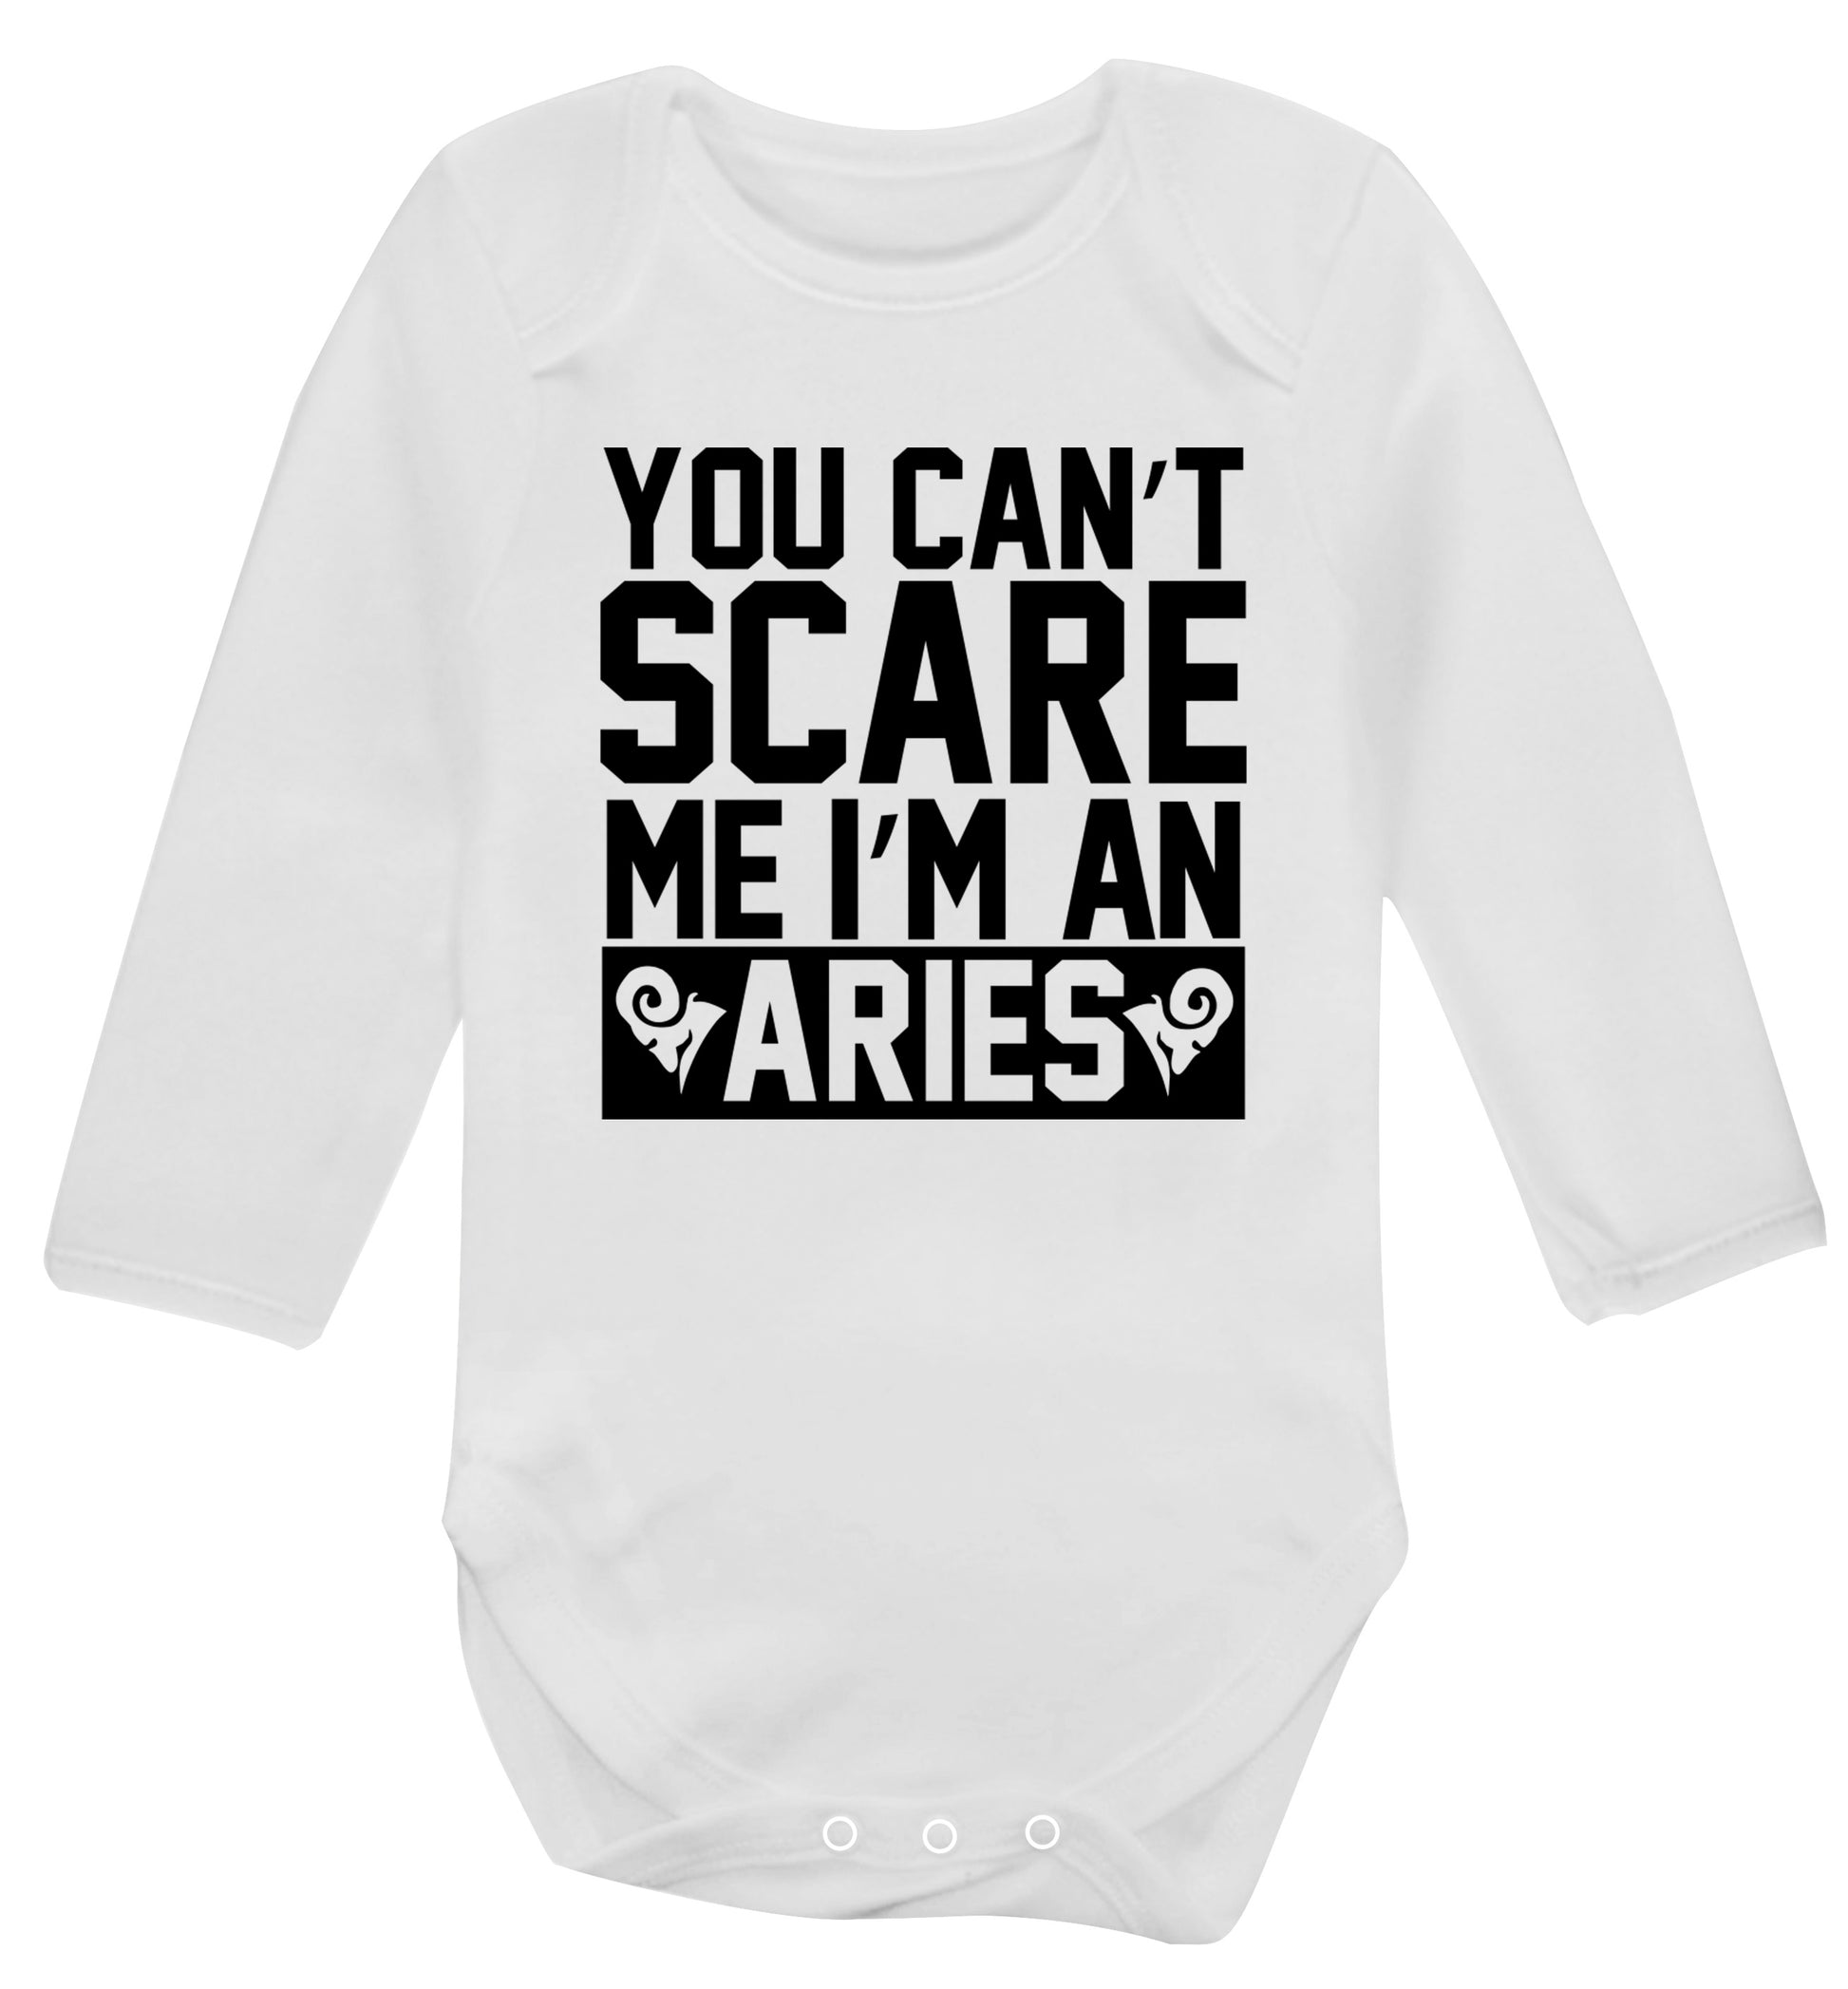 You can't scare me I'm an aries Baby Vest long sleeved white 6-12 months